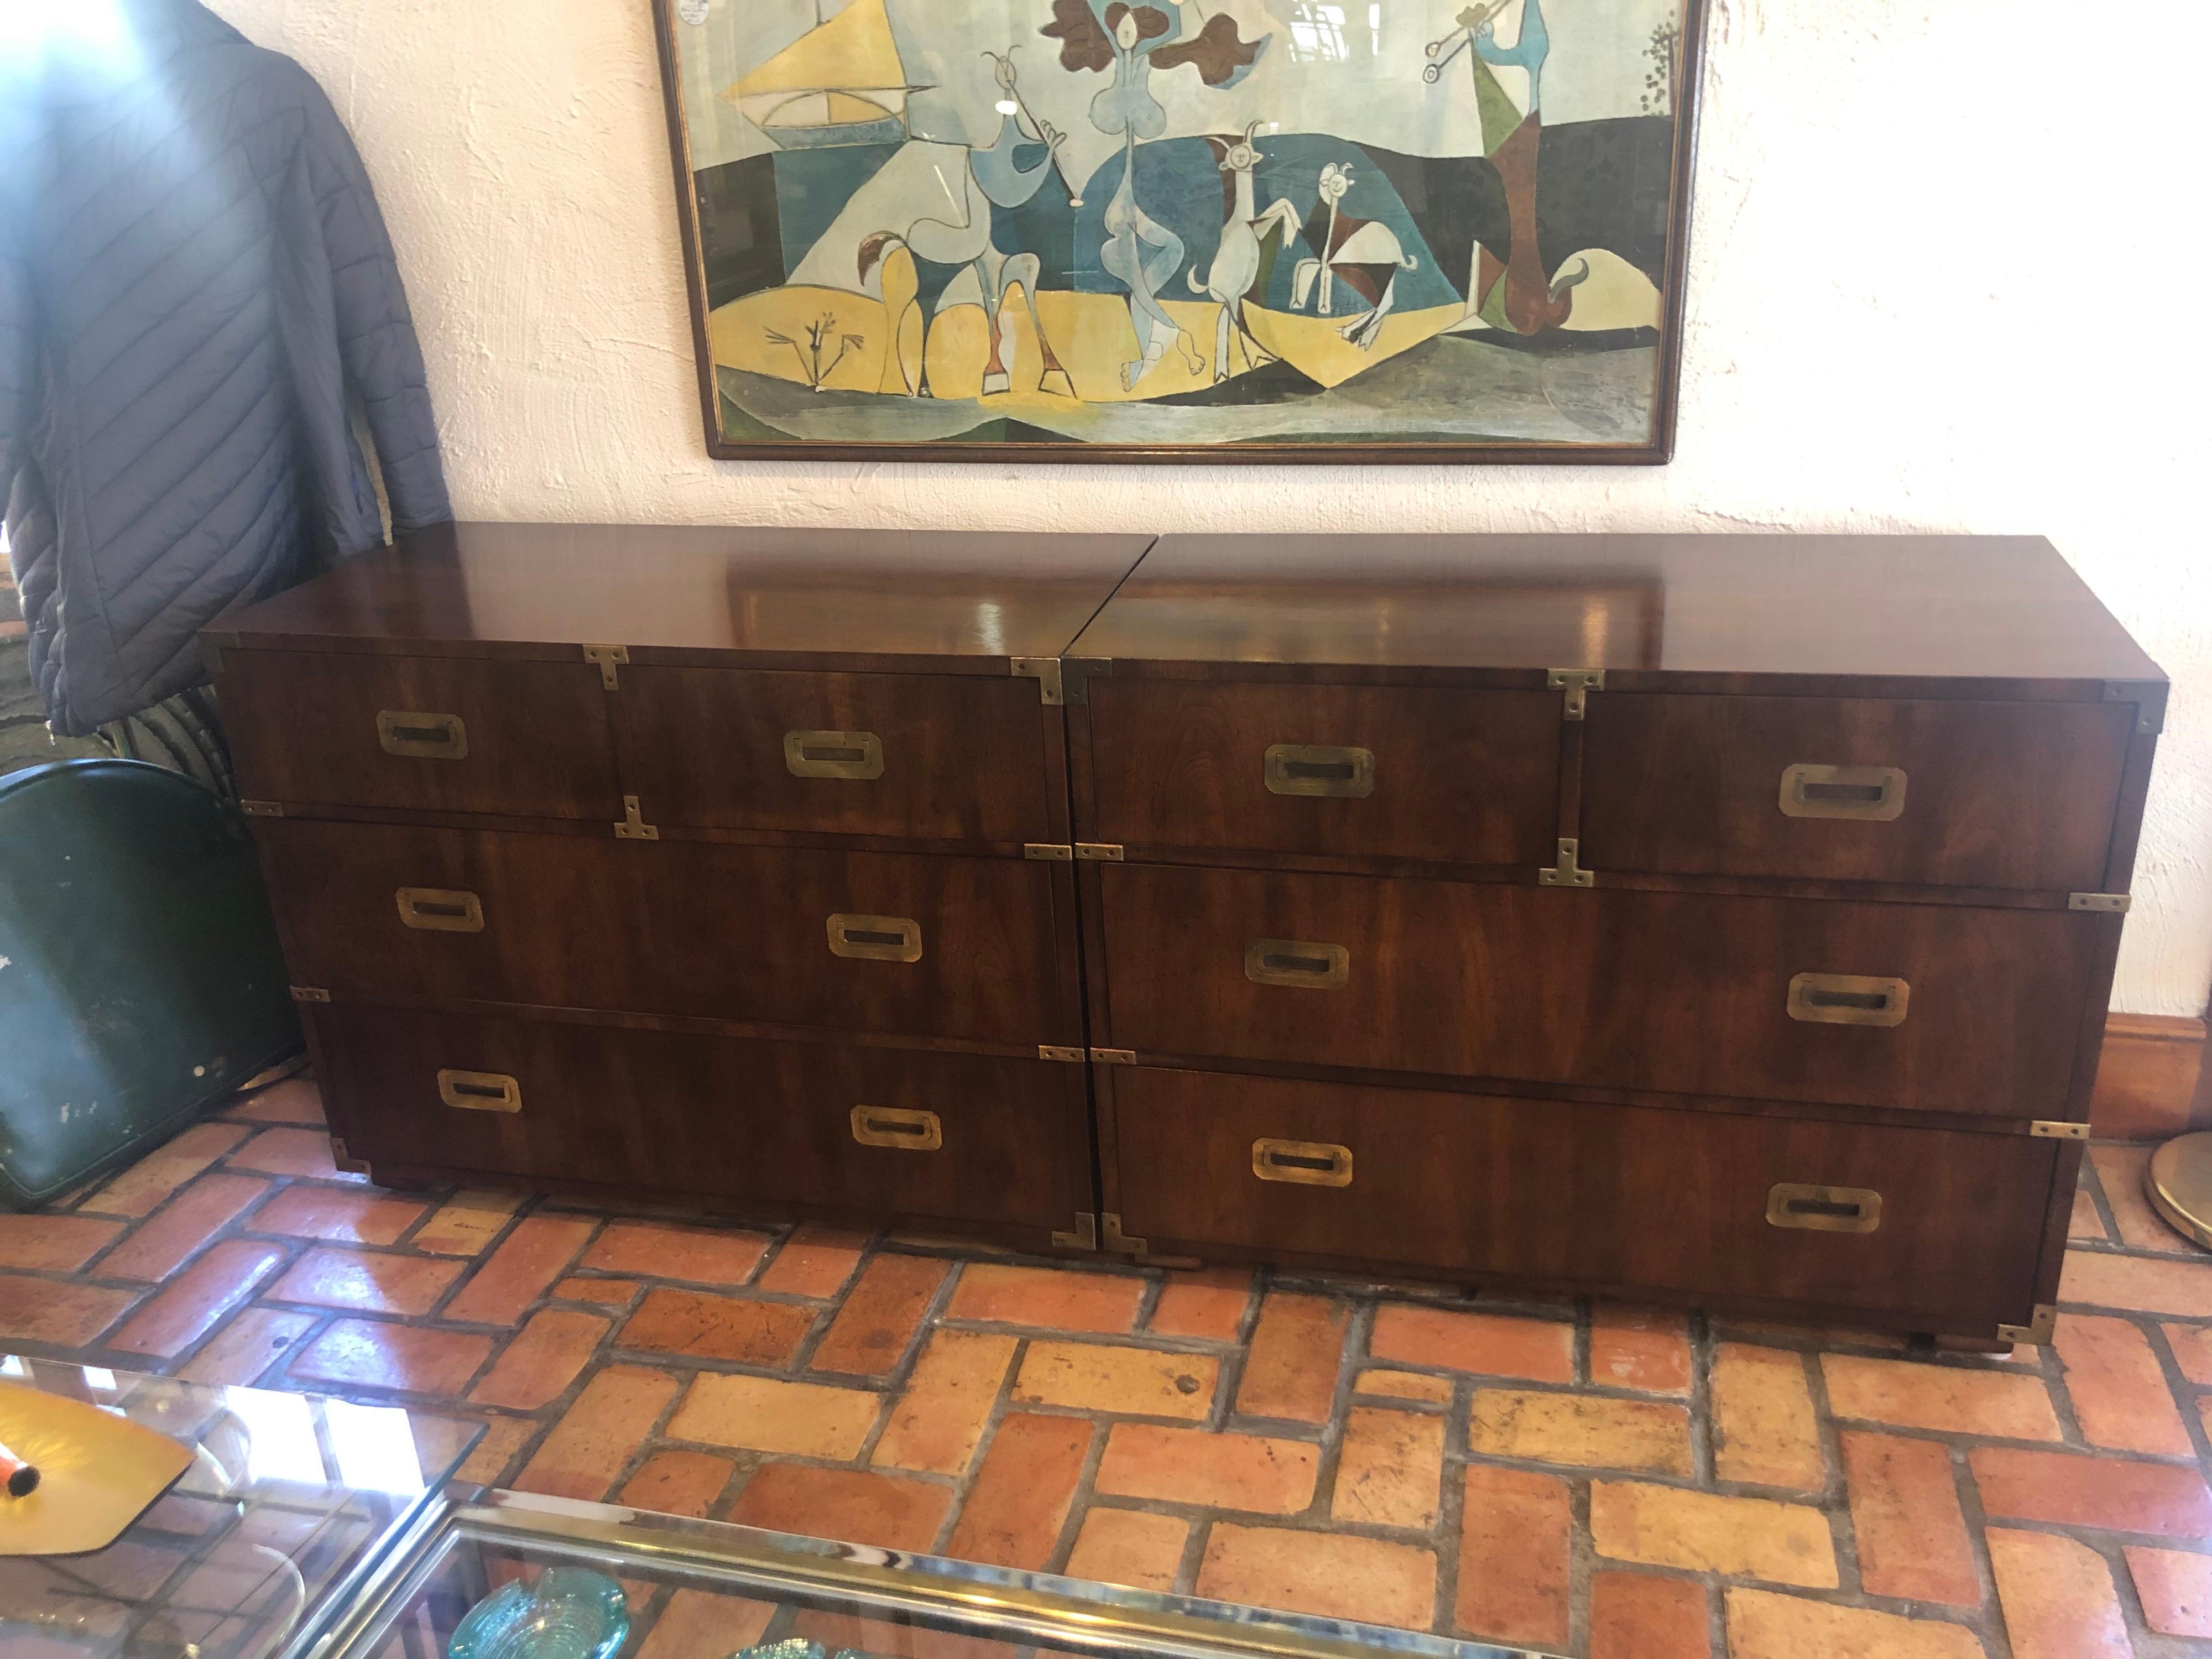 Pair of Mid-Century Modern campaign dressers by Henredon. Classic, timeless pieces. Rare to find a set in such good shape. Use as a pair of nightstands if you need oversized storage. Signed inside. Some drawers have vertical drawer dividers.